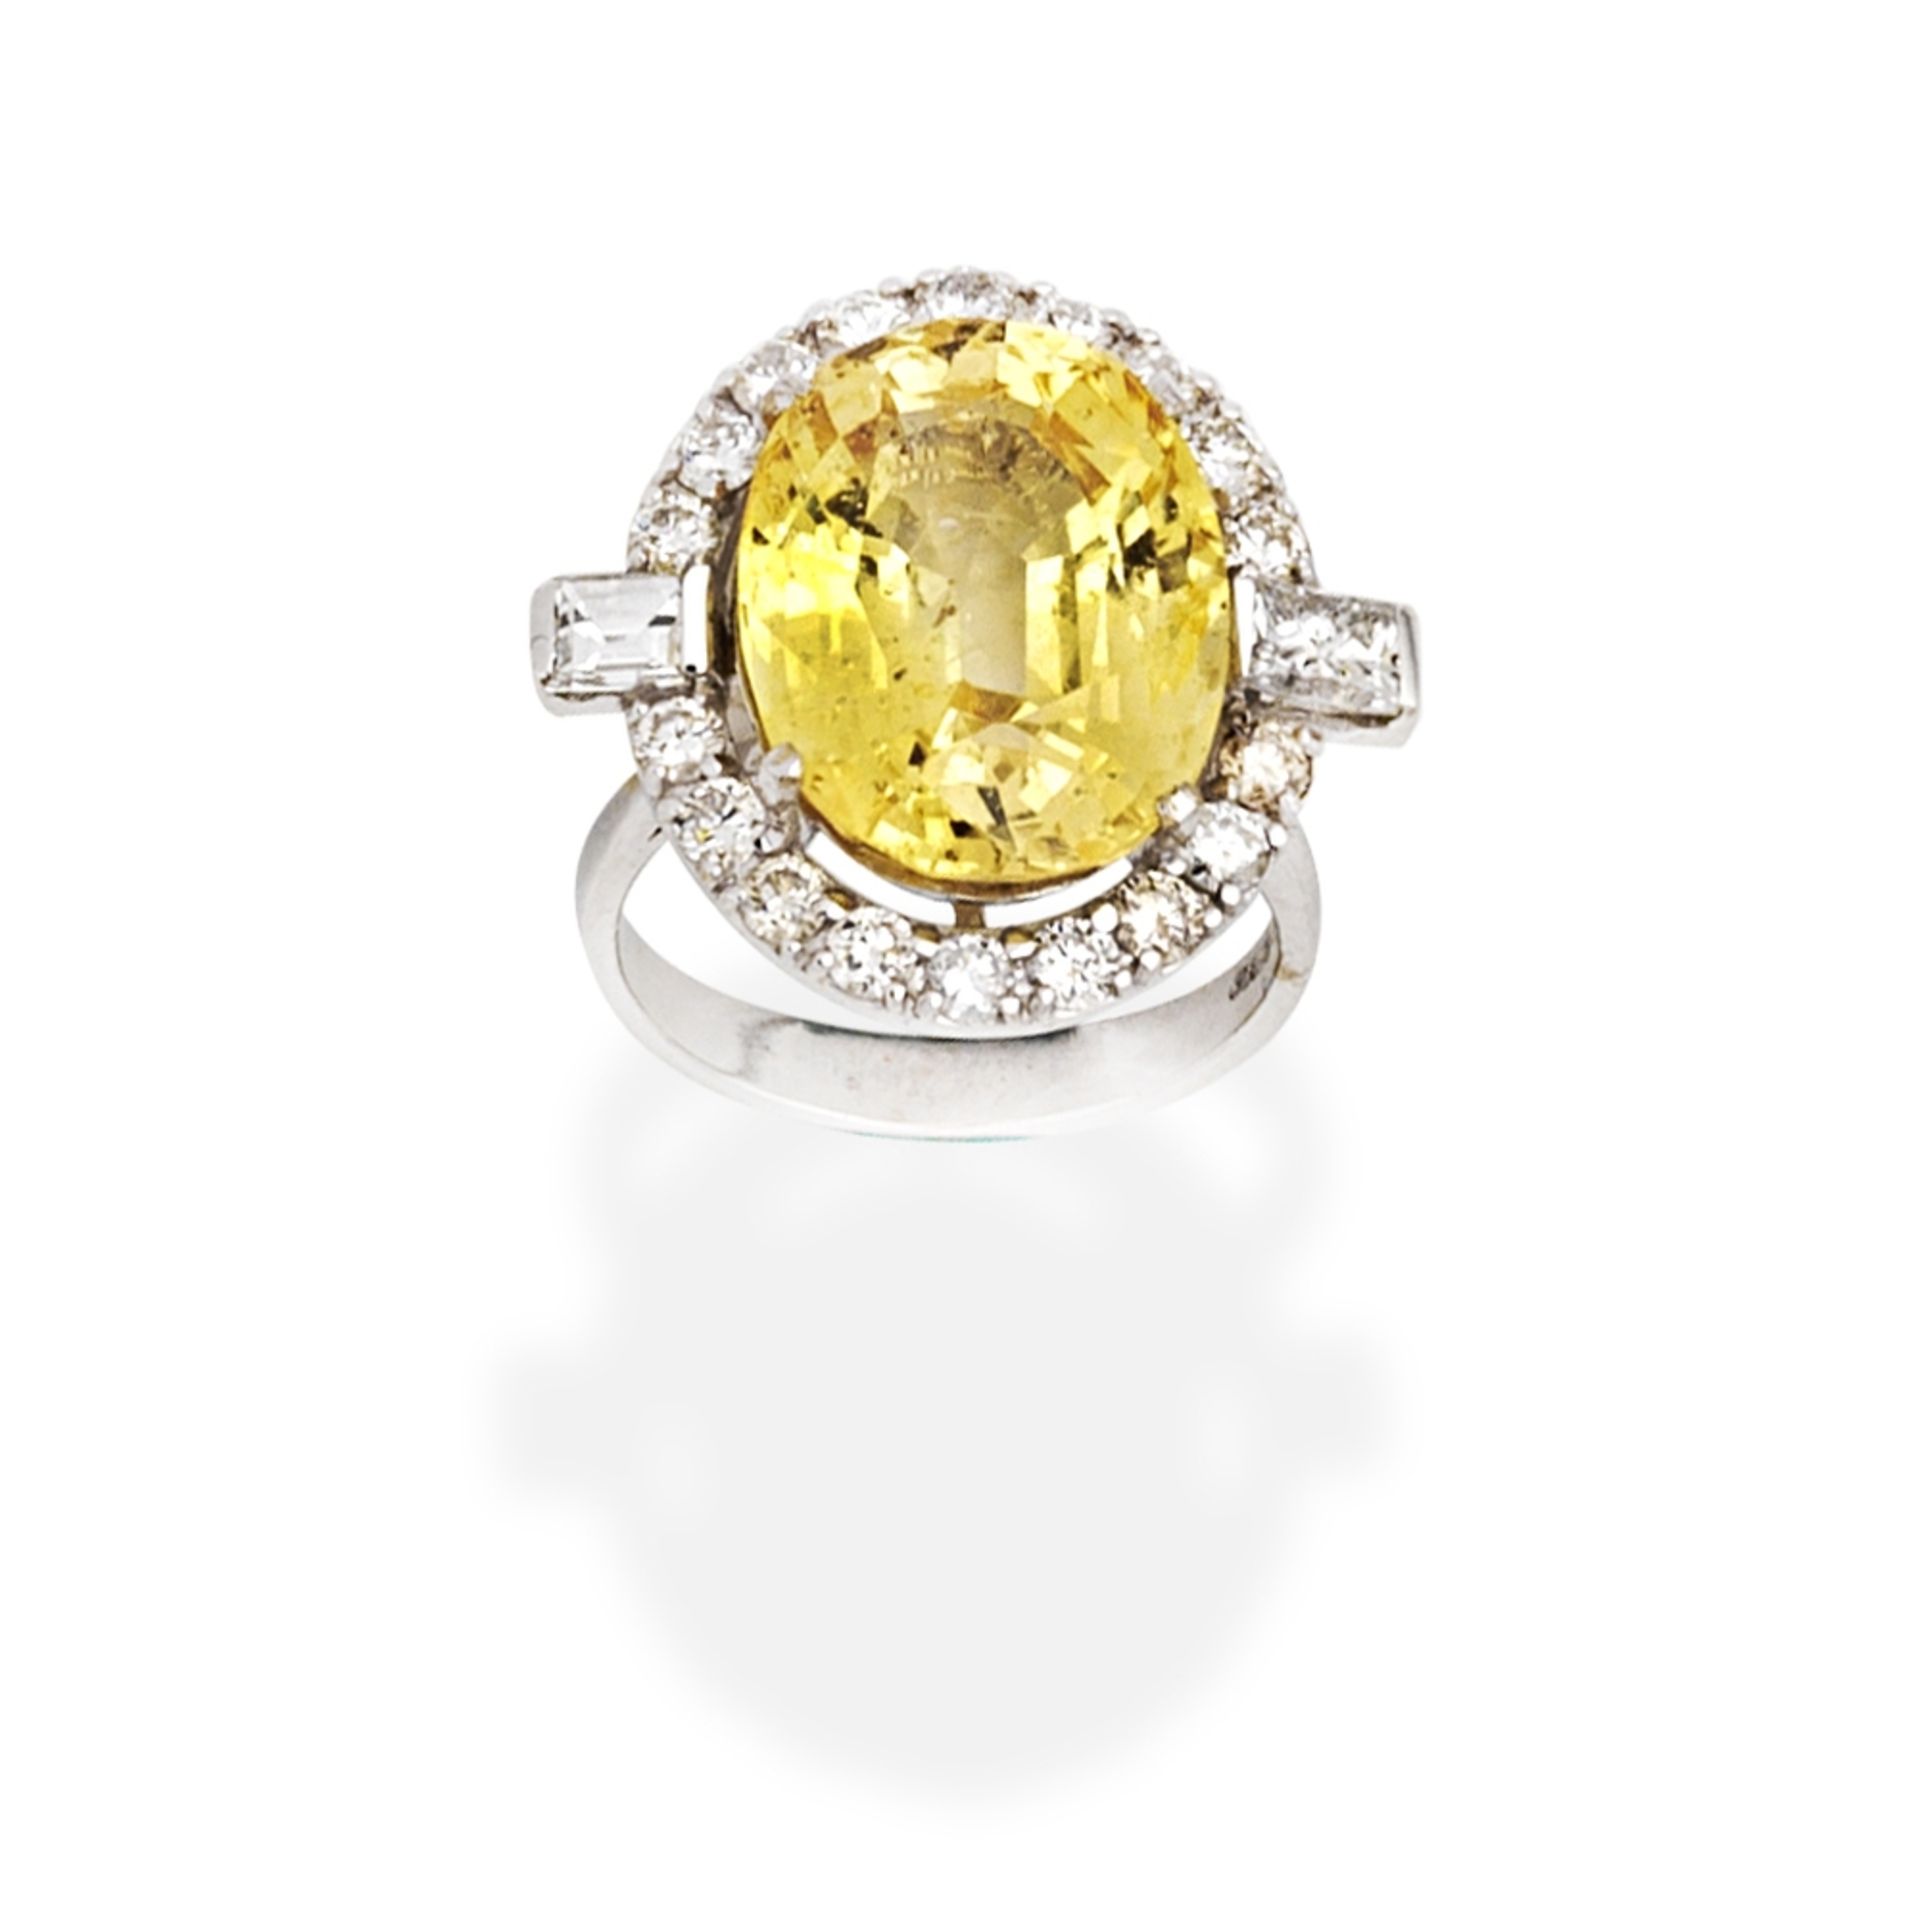 YELLOW SAPPHIRE AND DIAMOND CLUSTER RING - Image 2 of 2